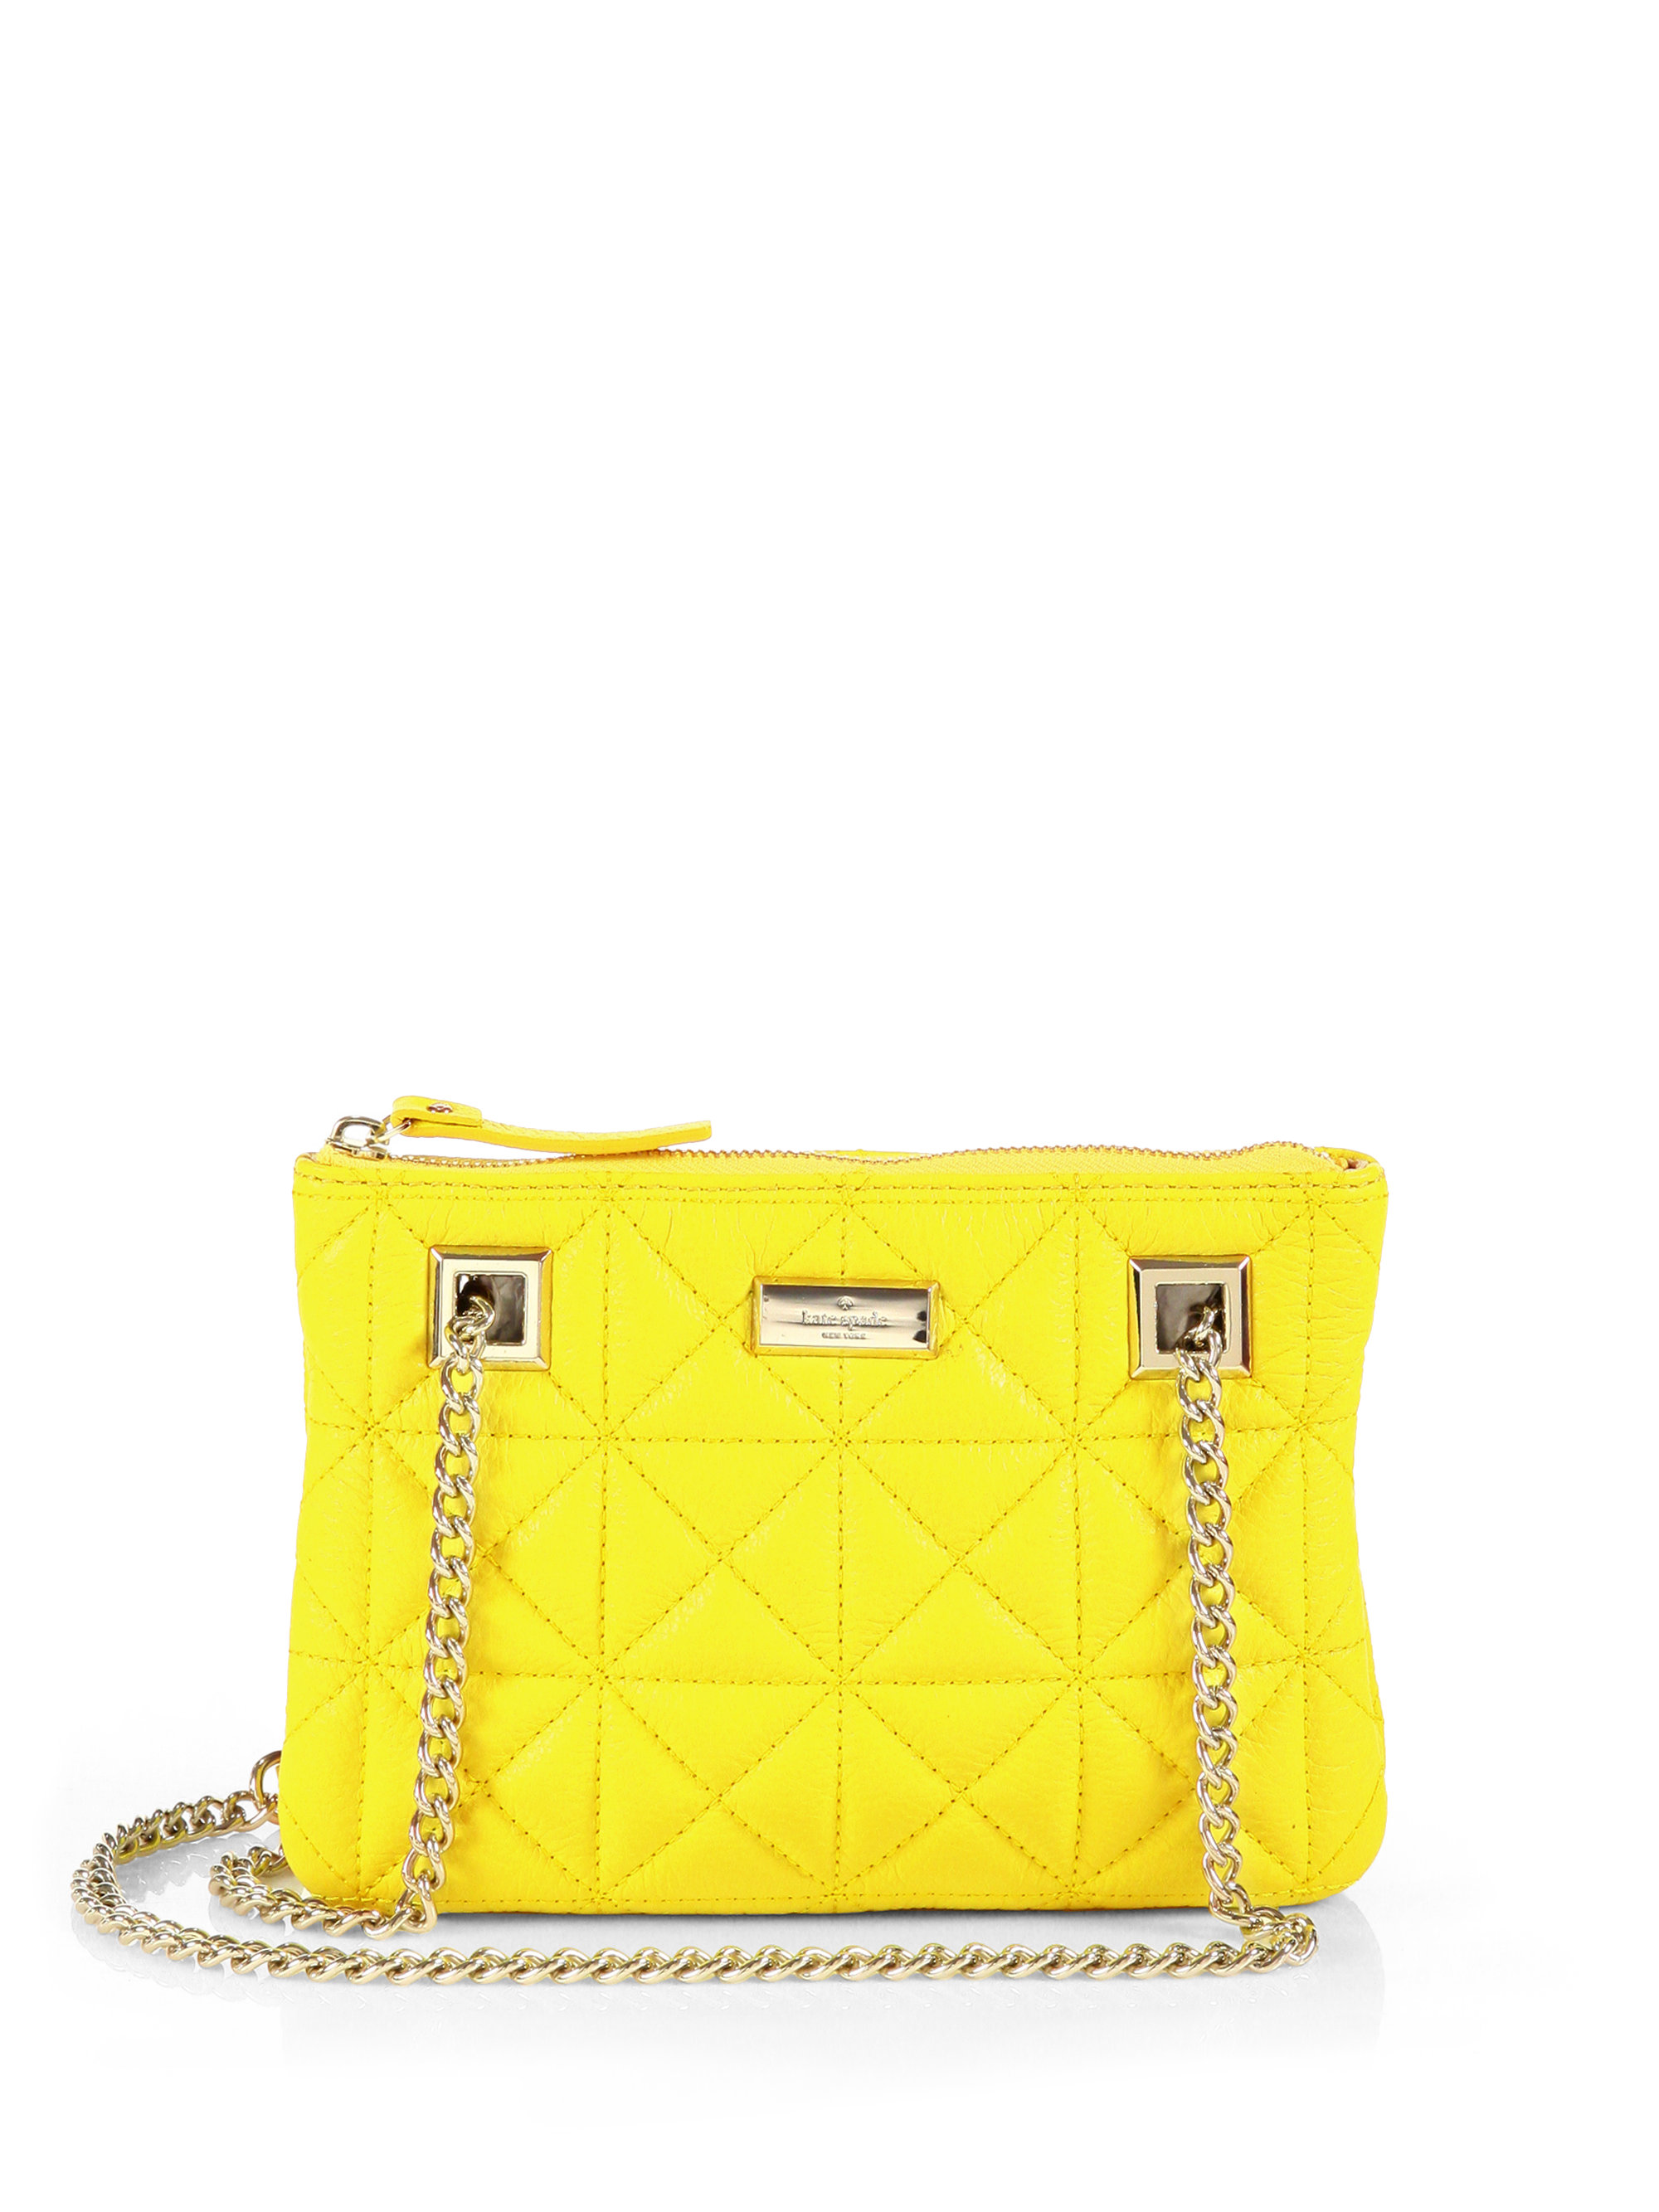 Kate Spade Sedgwick Place Morgan Quilted Shoulder Bag in Yellow ...